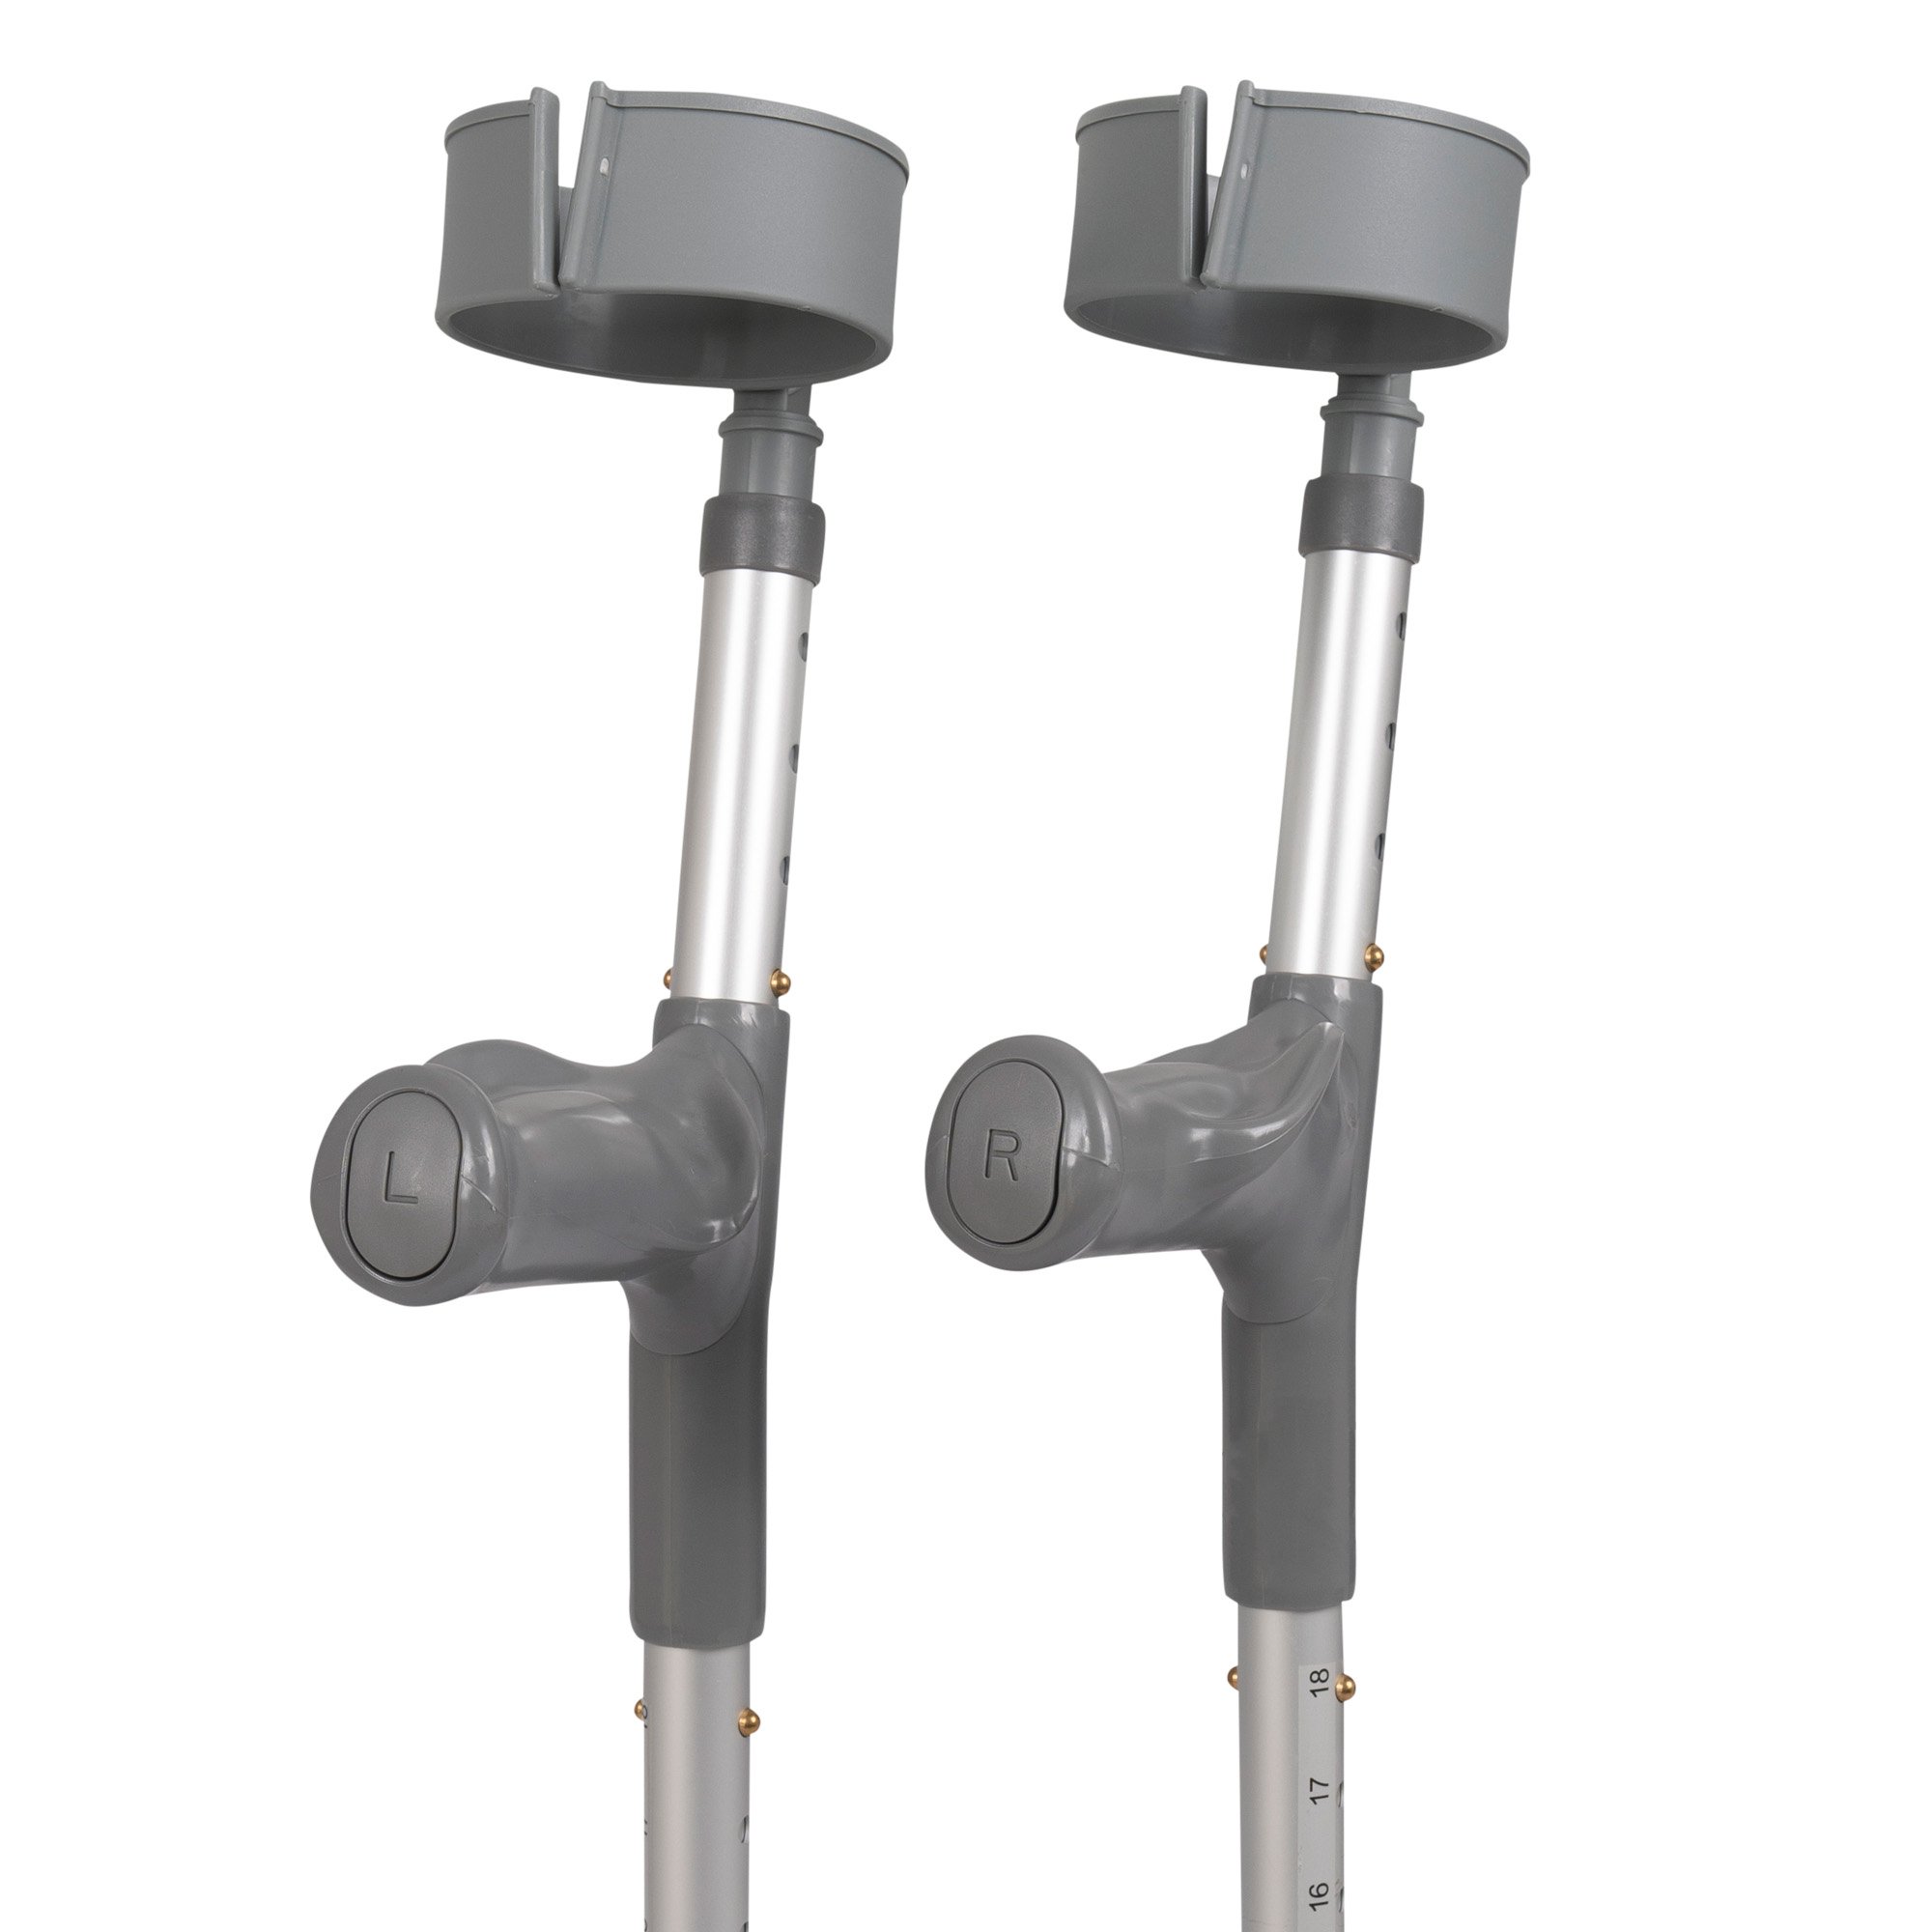 dunimed comfort elbow crutches side view